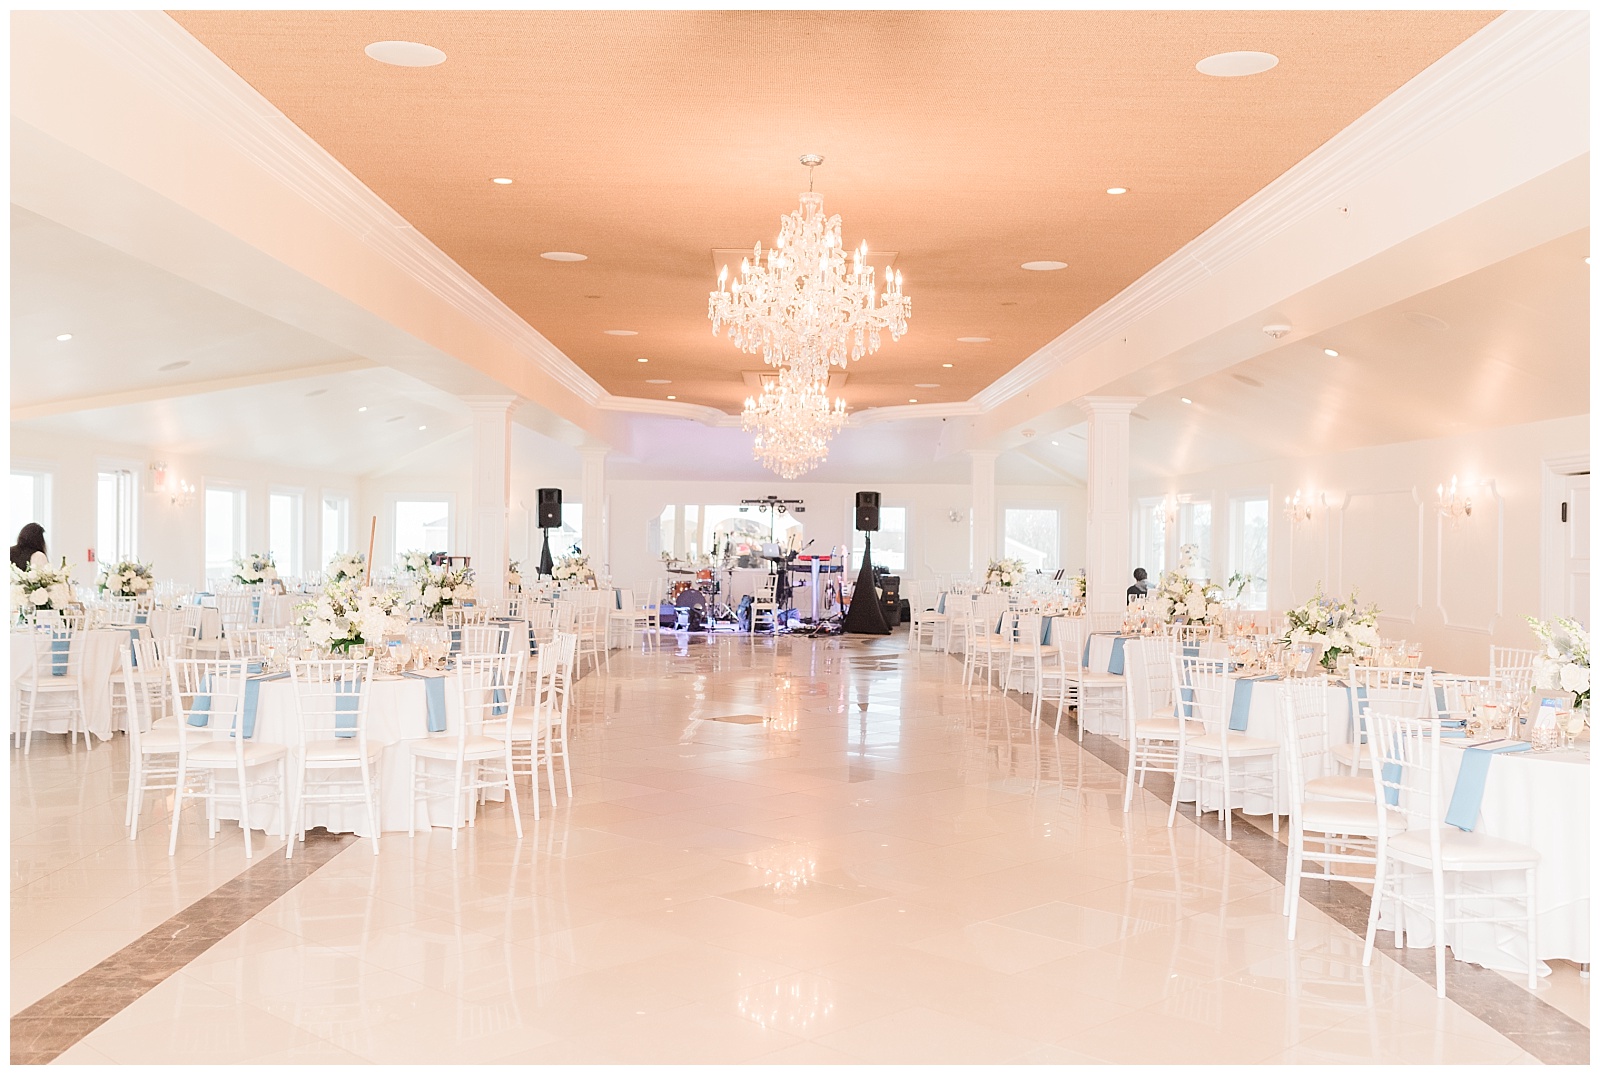 The ballroom of the Windows on the Water at Surfrider Beach Club is set for the reception.